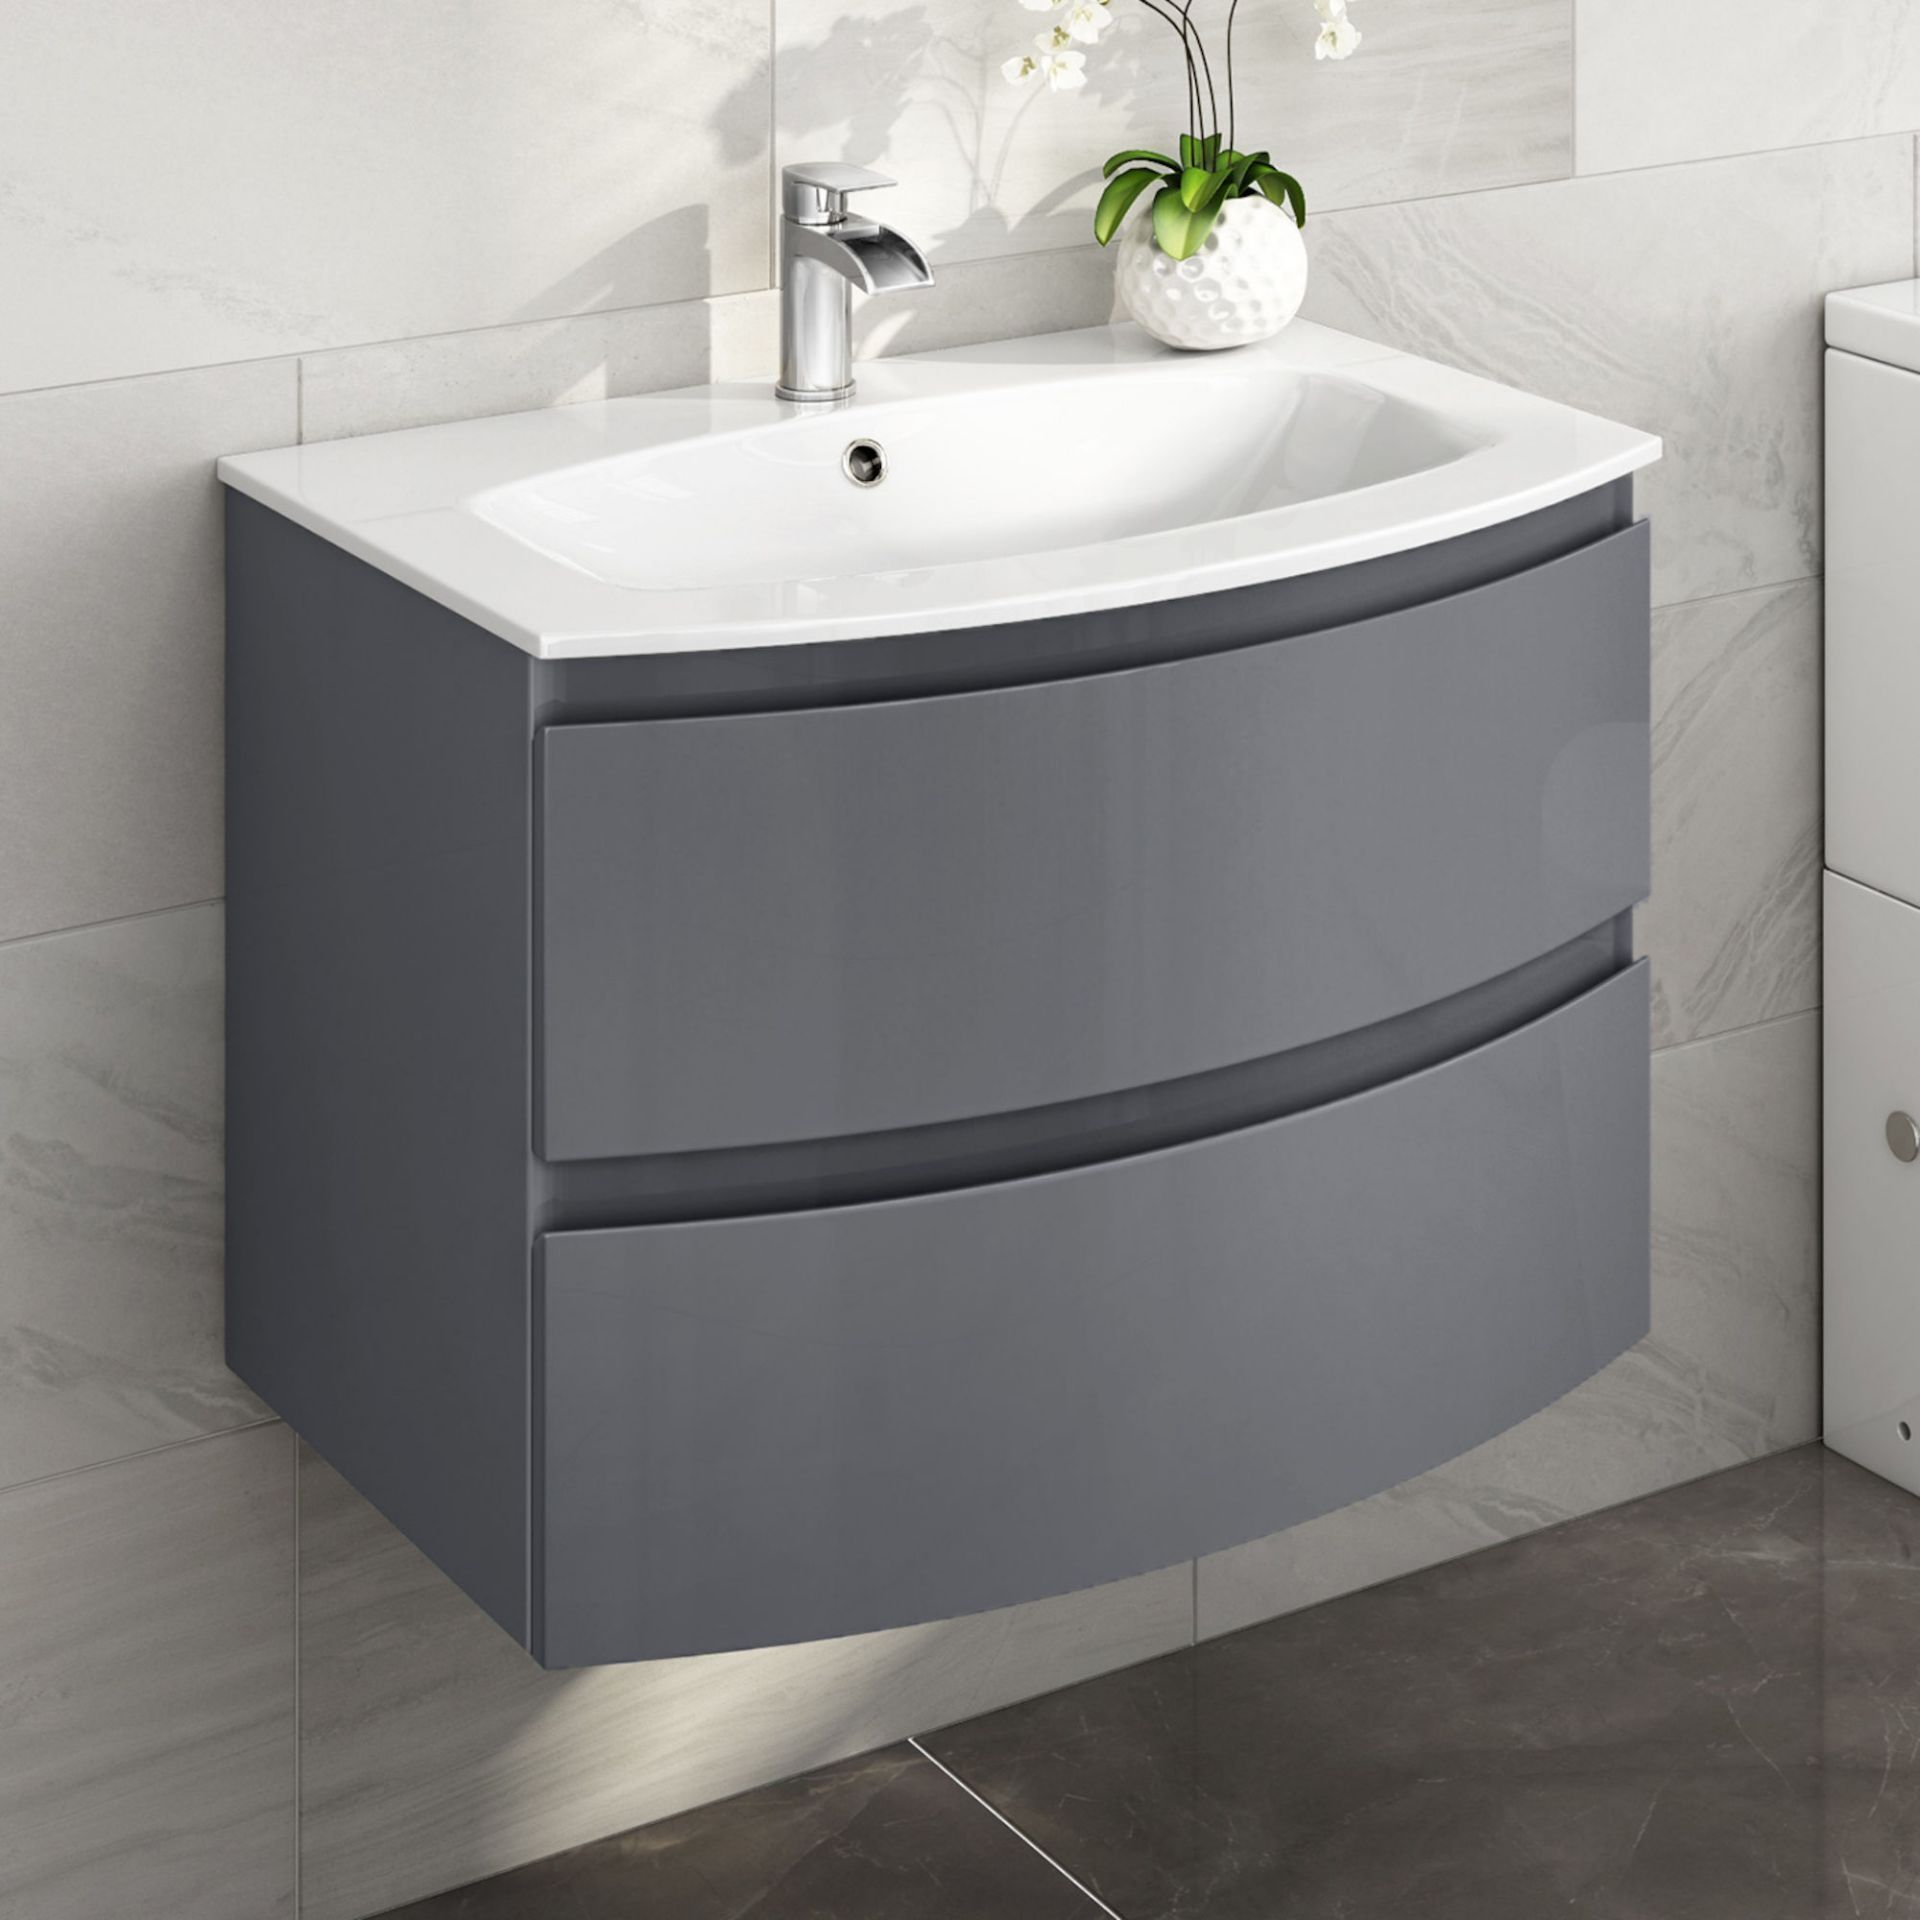 New & Boxed 700mm Amelie Gloss Grey Curved Vanity Unit - Wall Hung. RRP £999.99.Comes Complete